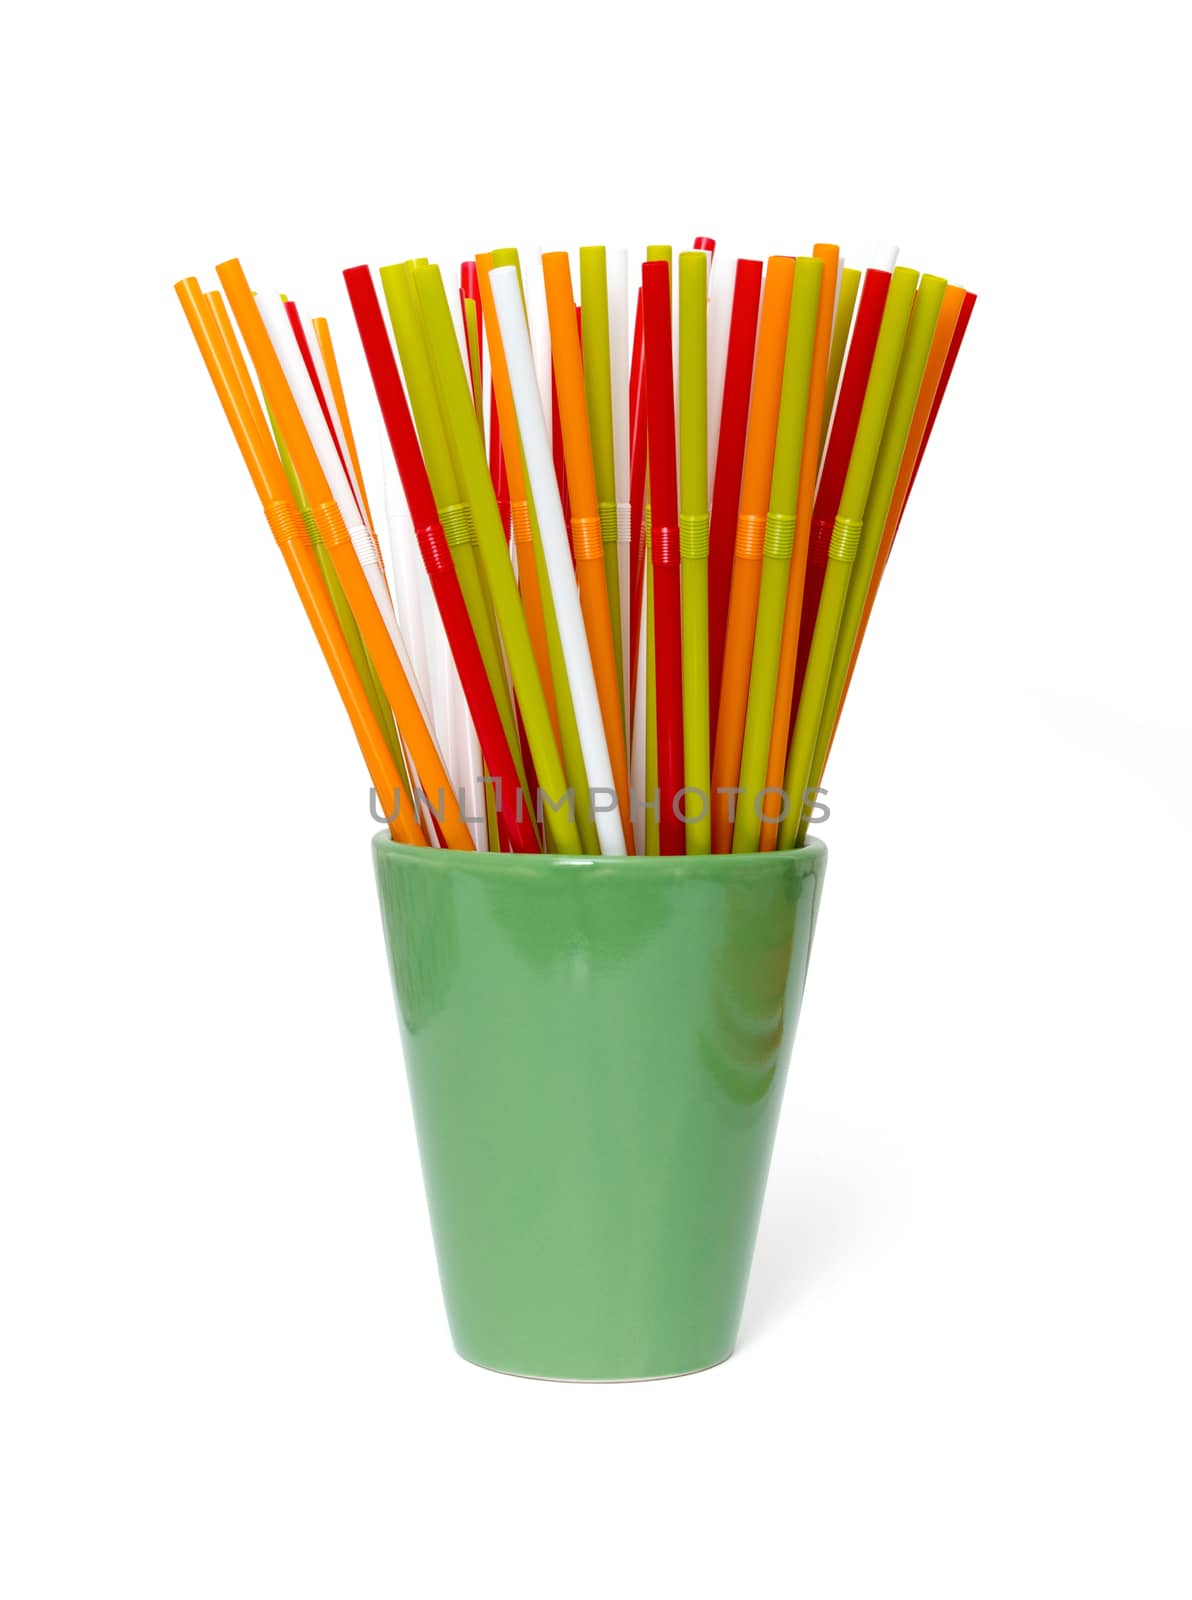 Straws for drinks in the glass. The photo on white background